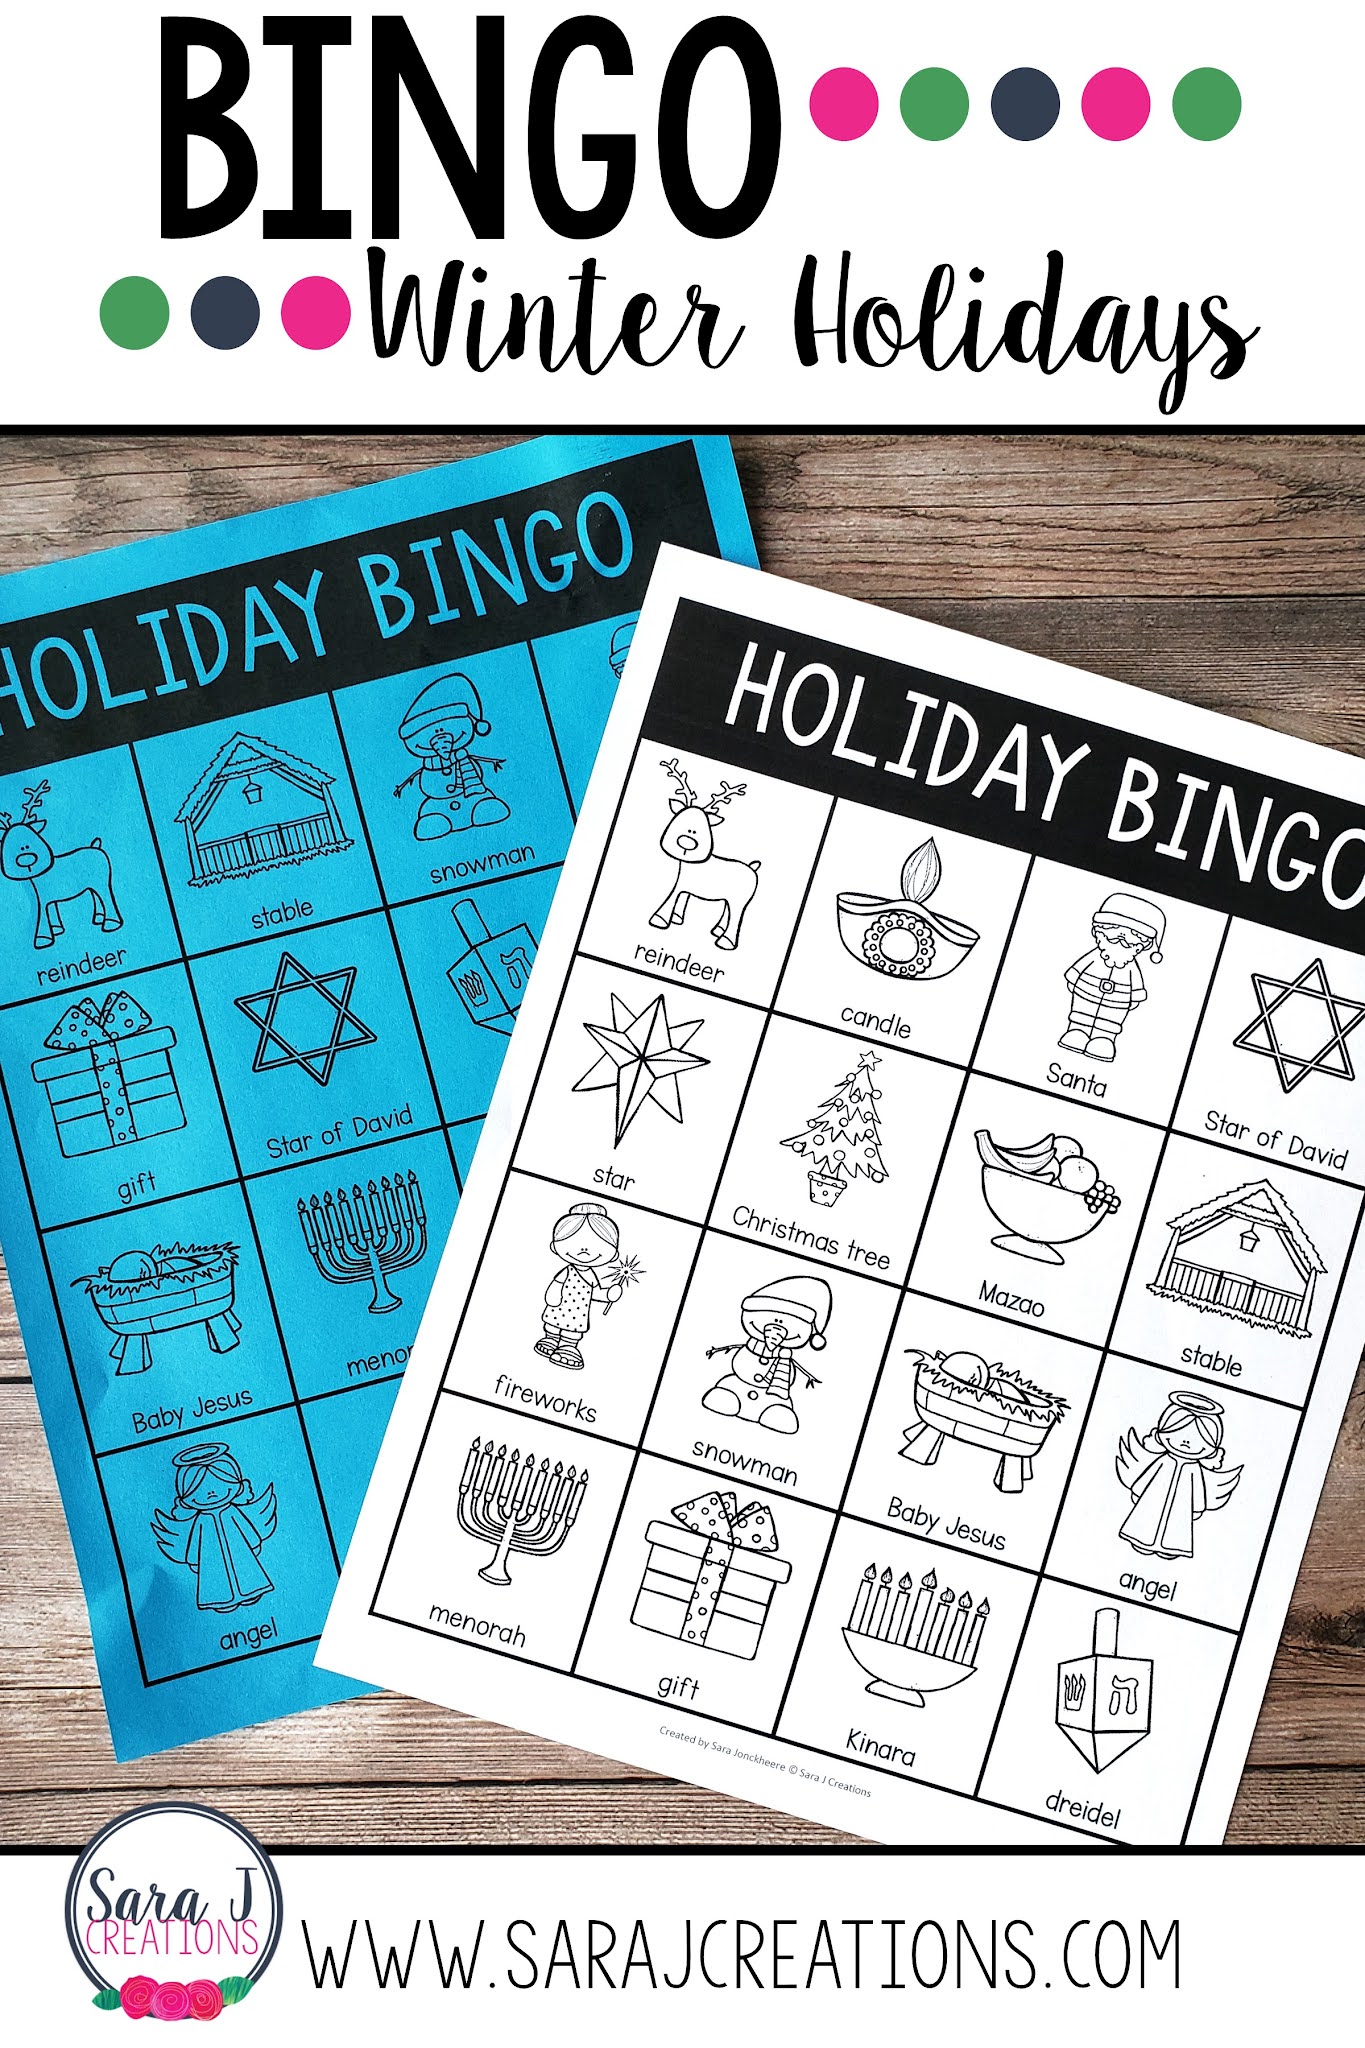 Holiday Celebrations Bingo includes pictures with words for winter holidays including Christmas, Kwanzaa, Hanukkah, Diwali and winter.A class set of games boards is included in color and black and white. Each board is different which makes this perfect to print and play! Perfect for your classroom holiday party!